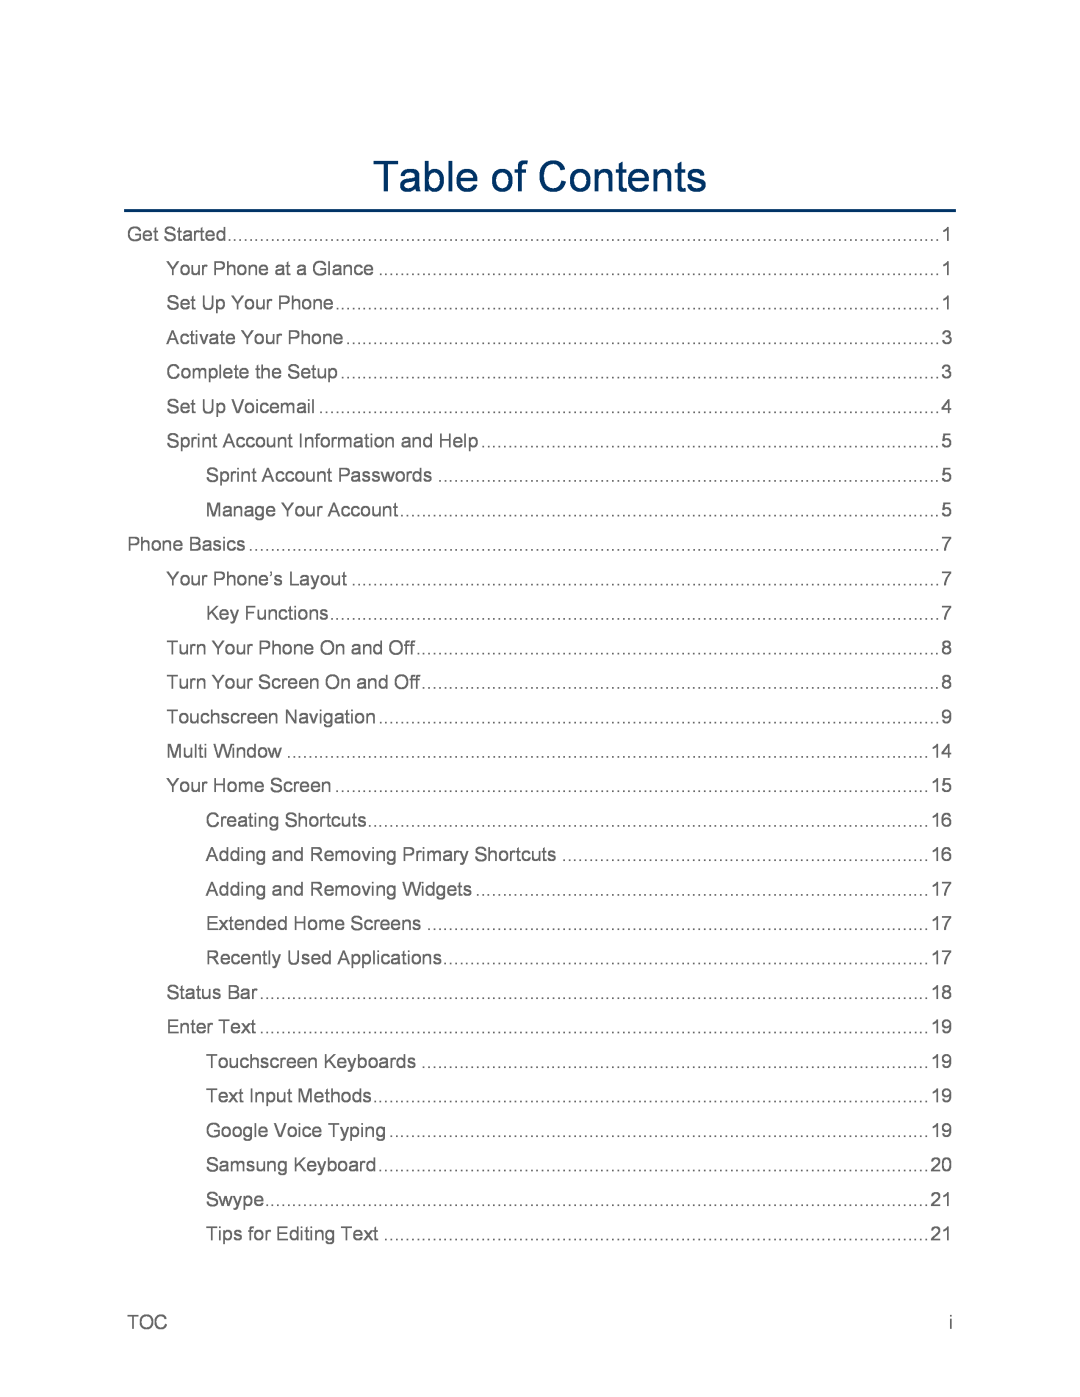 Table of Contents Galaxy S III Sprint